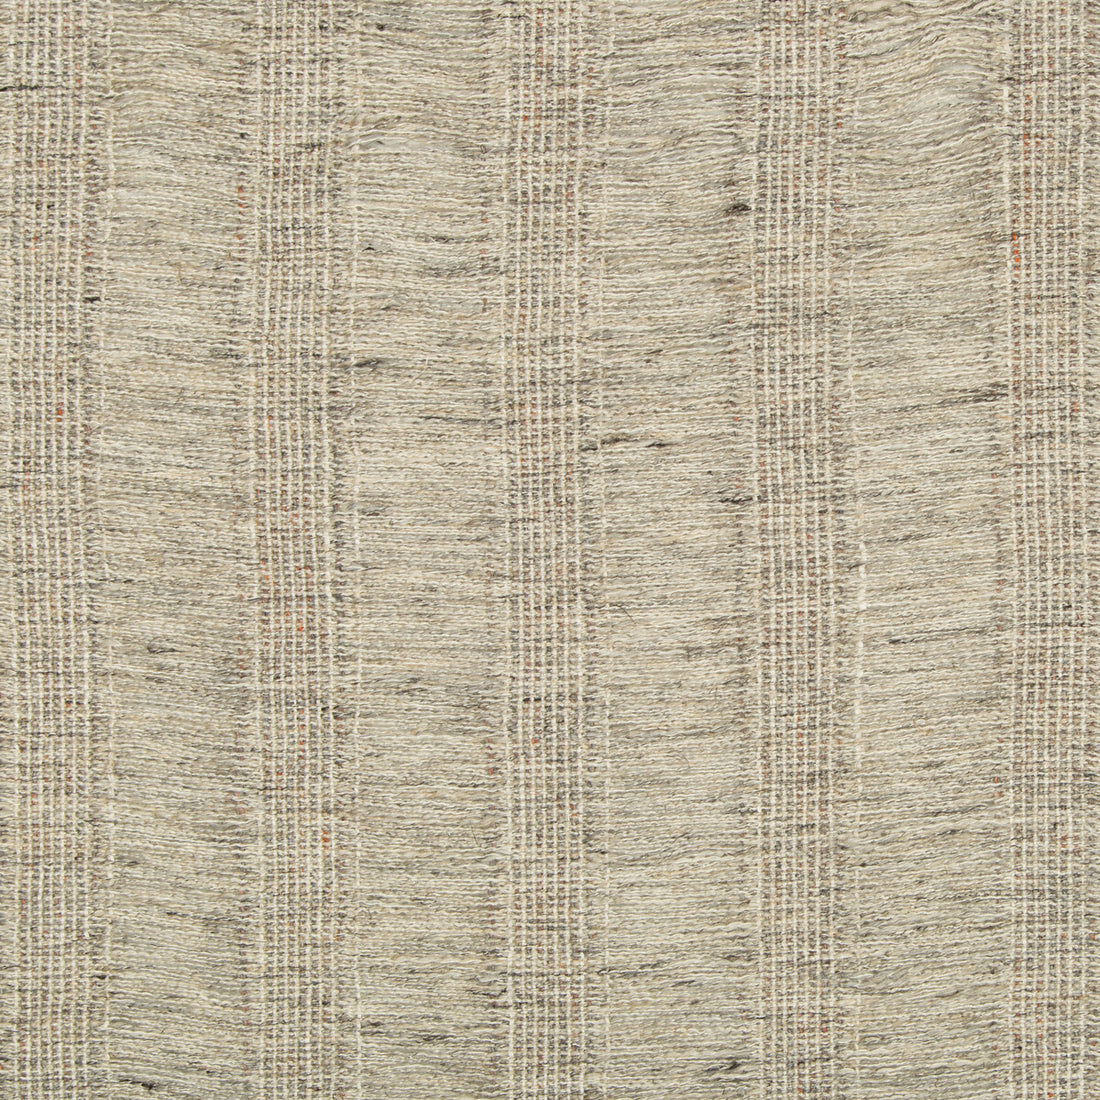 Fermata fabric in sparrow color - pattern 4482.106.0 - by Kravet Couture in the Sue Firestone Malibu collection